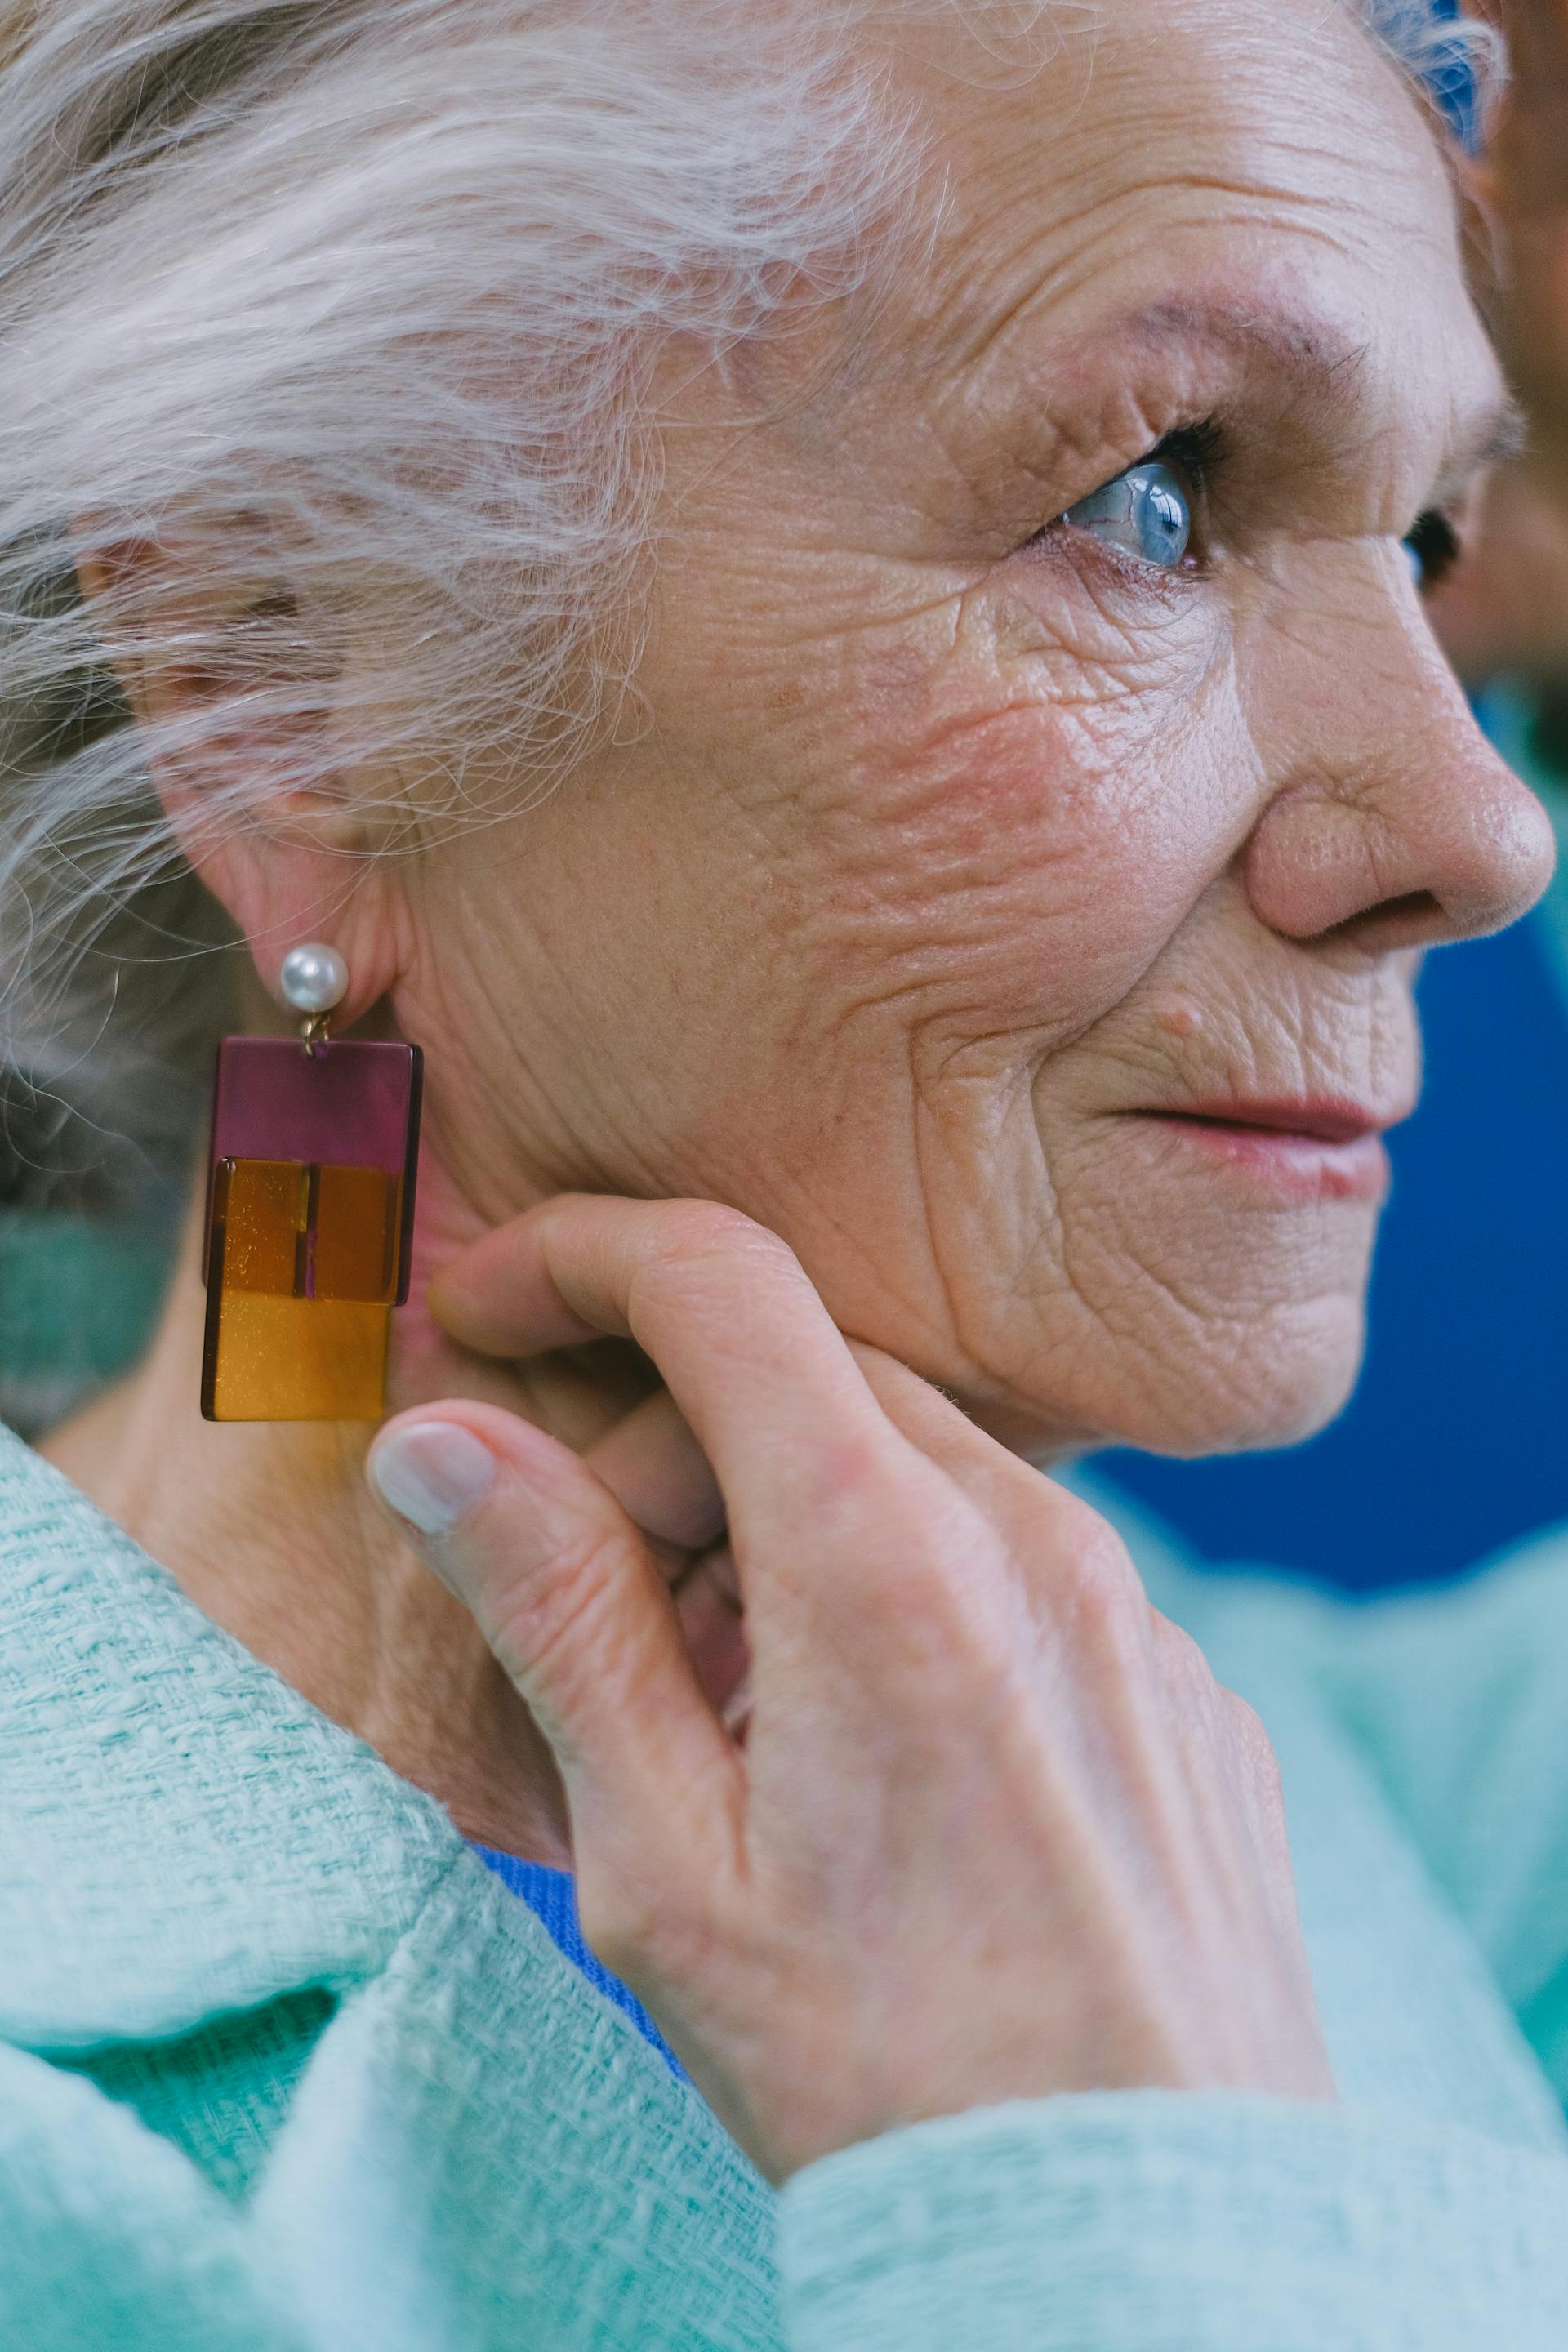 An older woman staring daggers | Source: Pexels